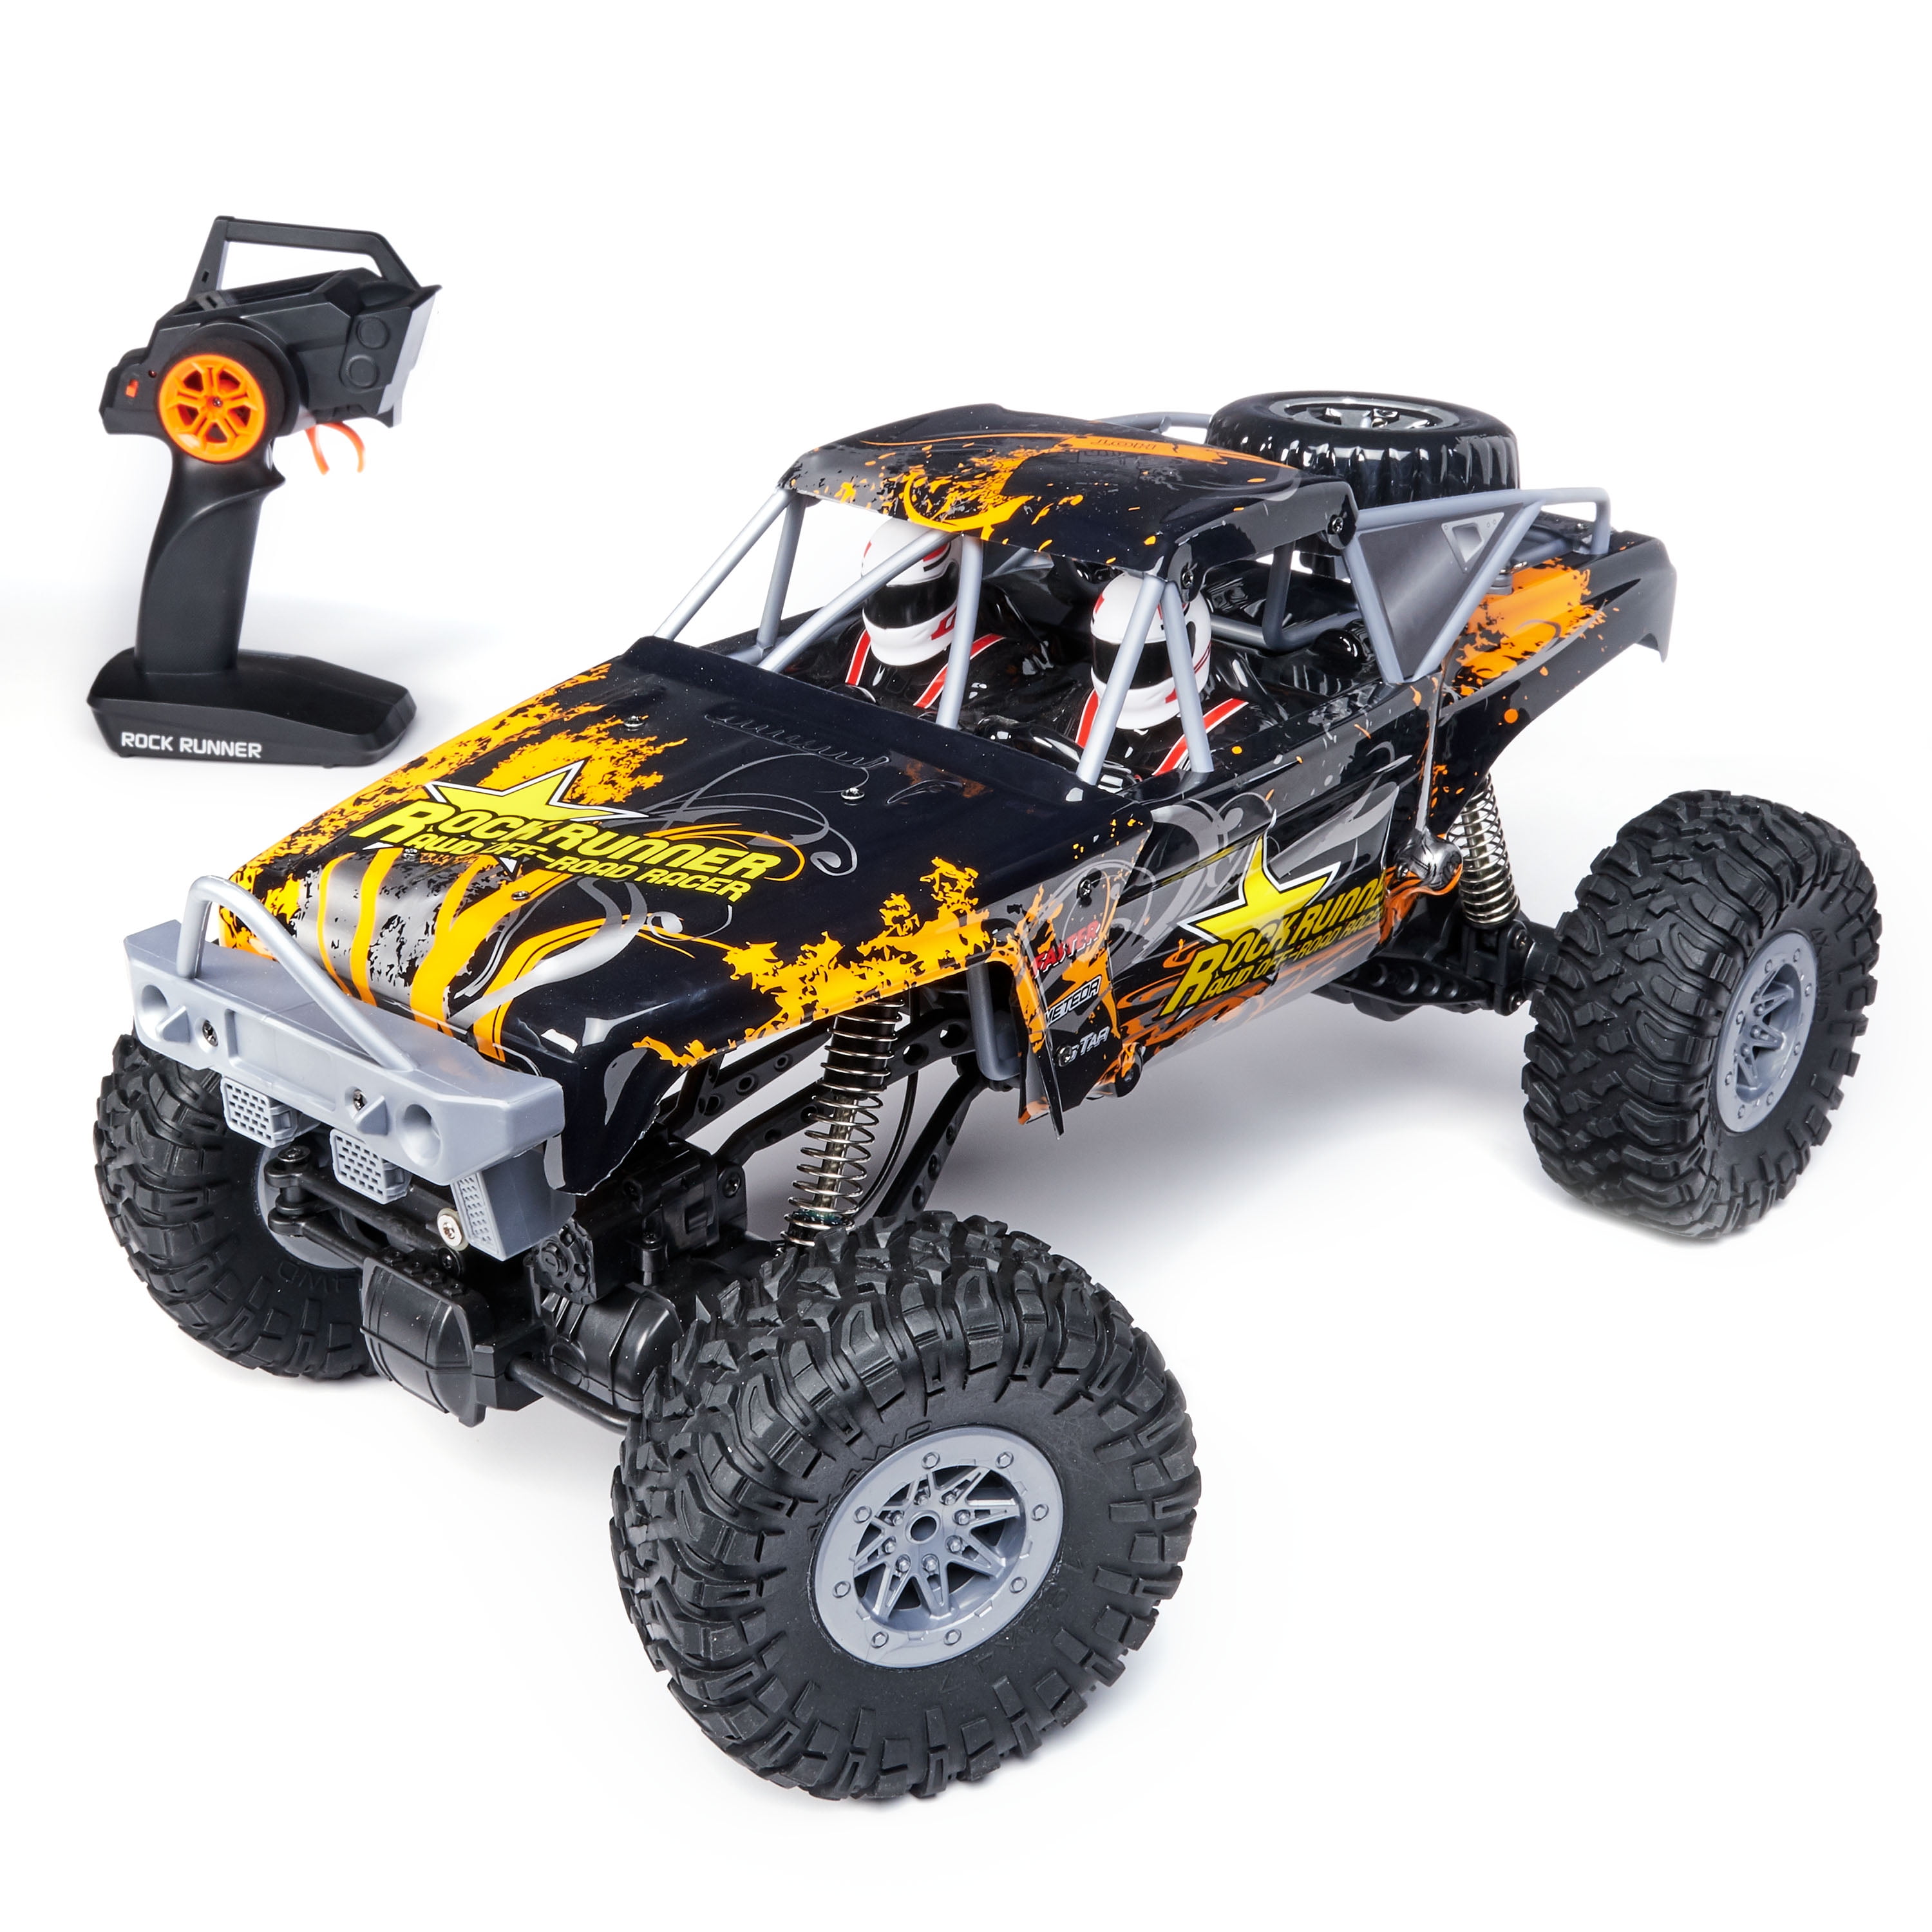 All-Terrain Climber Durable Boley 2099 Action-Packed RC Car Toy for Boys and Girls Easy to Control Perfect for Gifts and Party Favors! Lightning Raider 4-Wheel Drive Radio Control 